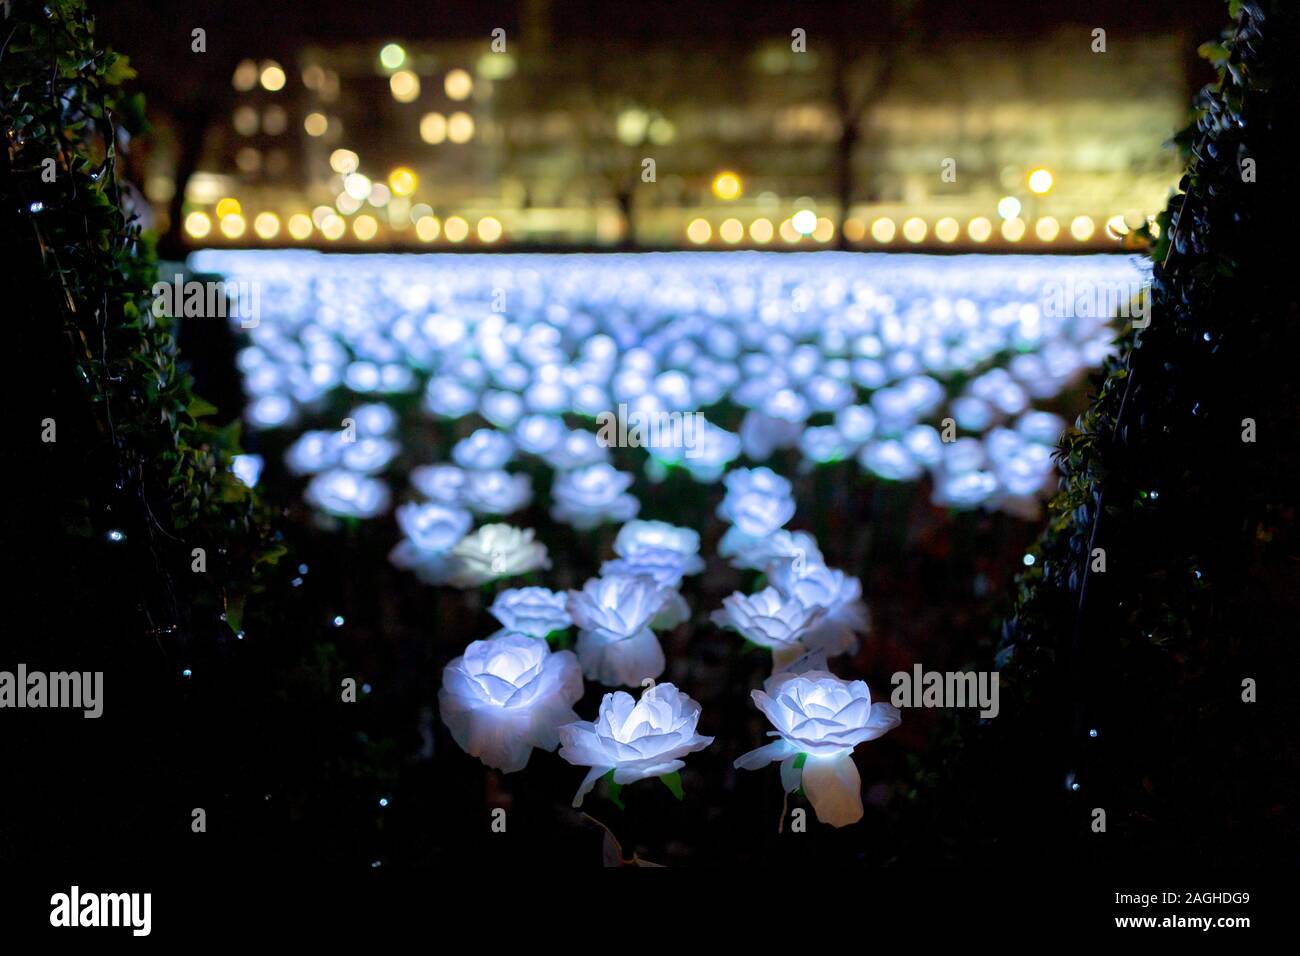 London, UK. 19th December, 2019. Ever After Garden in Grosvenor Square, Mayfair. Illuminated with thousands of glowing white roses for Christmas, visitors are invited to 'plant' a silk rose in memory of a loved one. Ever After Garden has spaces for 27,000 roses and is intended as somewhere for Londoners to remember absent friends and family this Christmas. Credit: Guy Corbishley/Alamy Live News Stock Photo